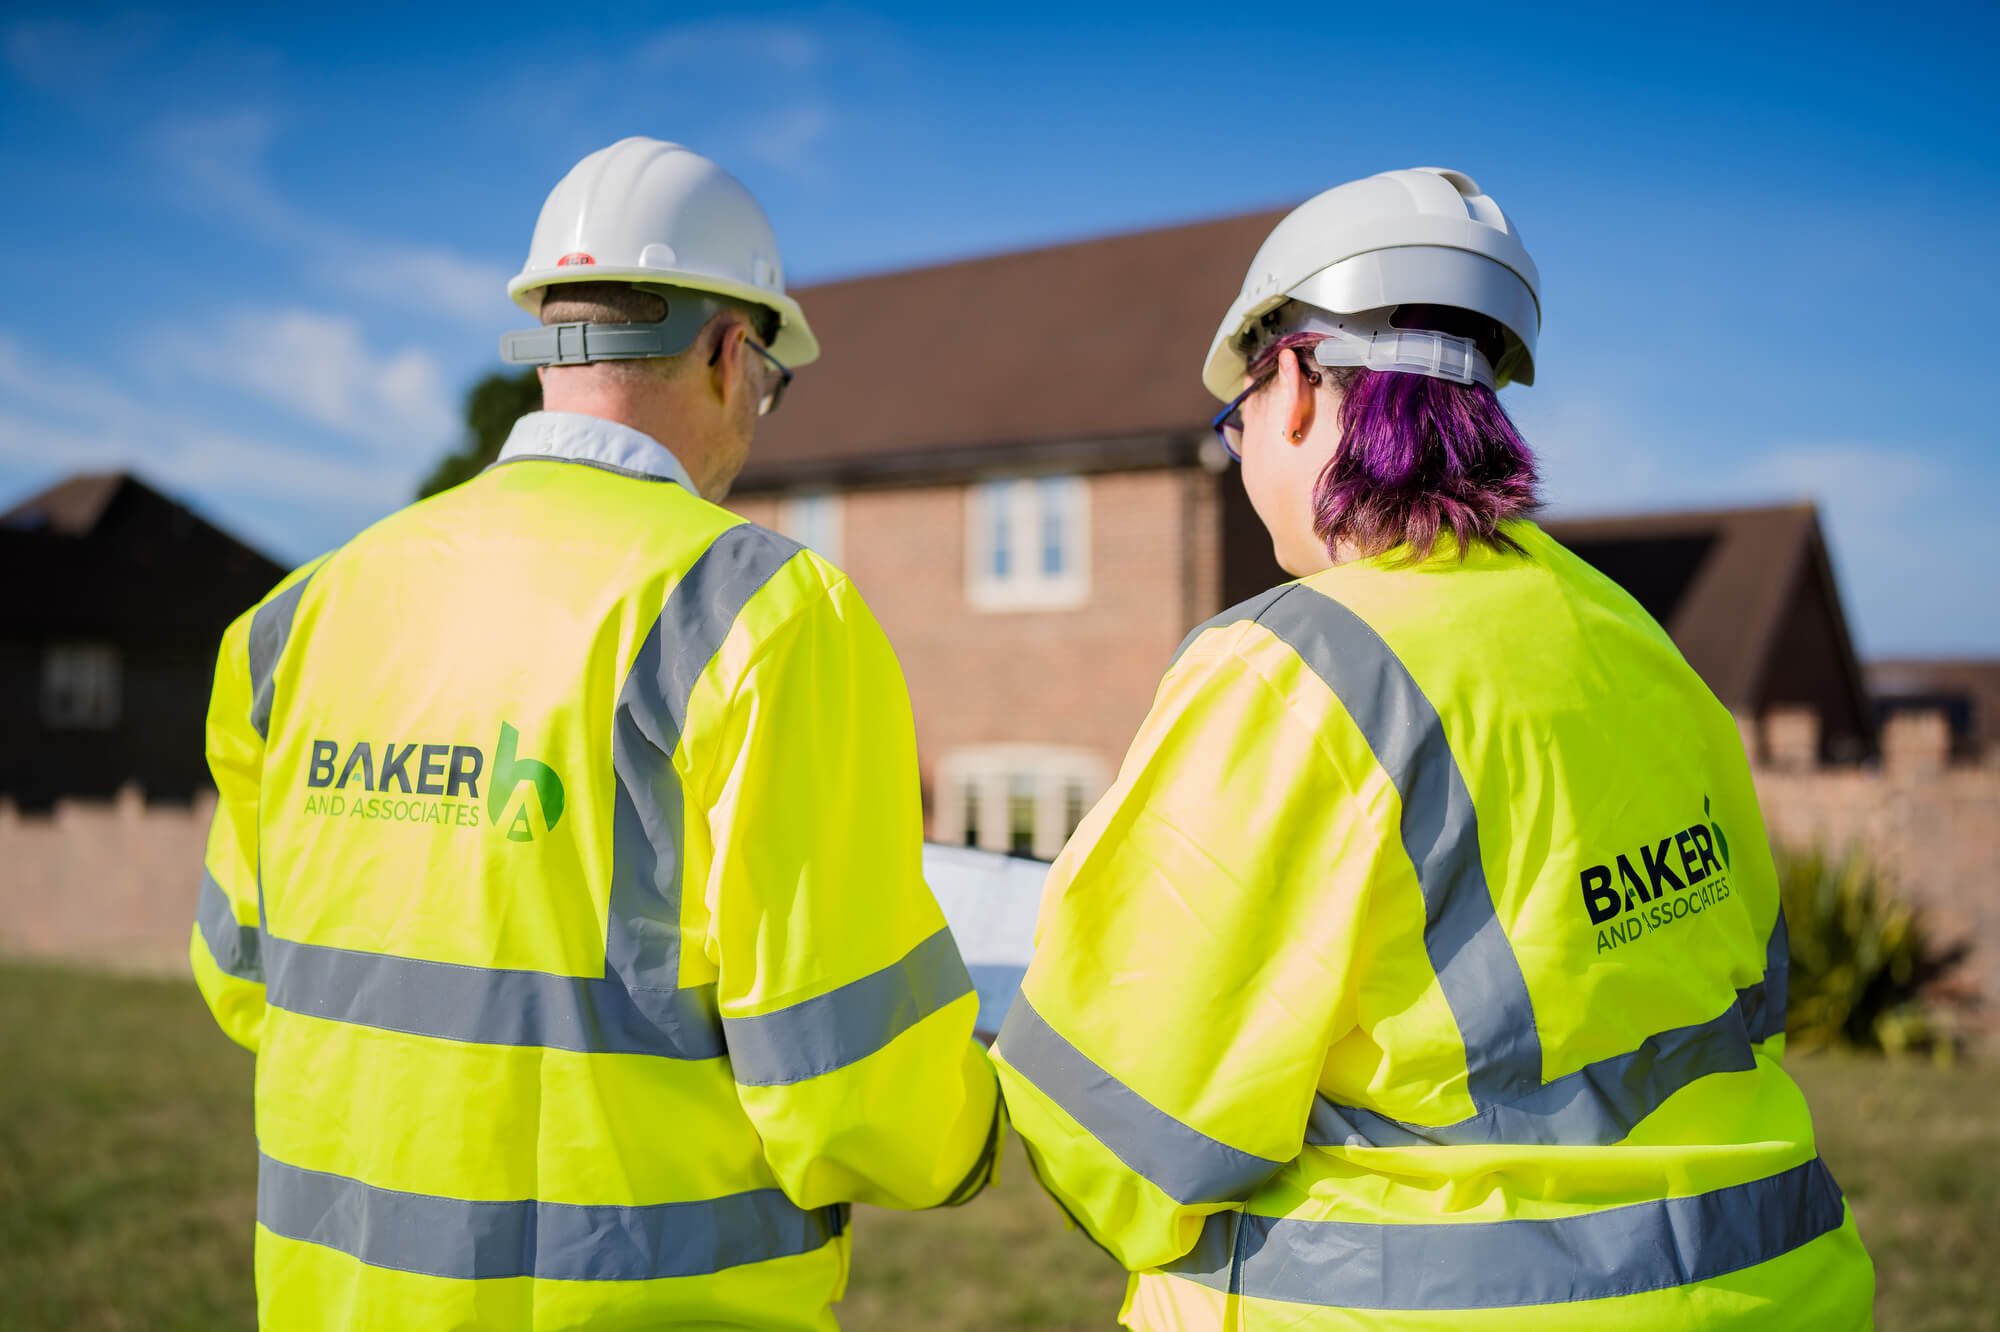 professional environmental photo of Baker Associates working on building site